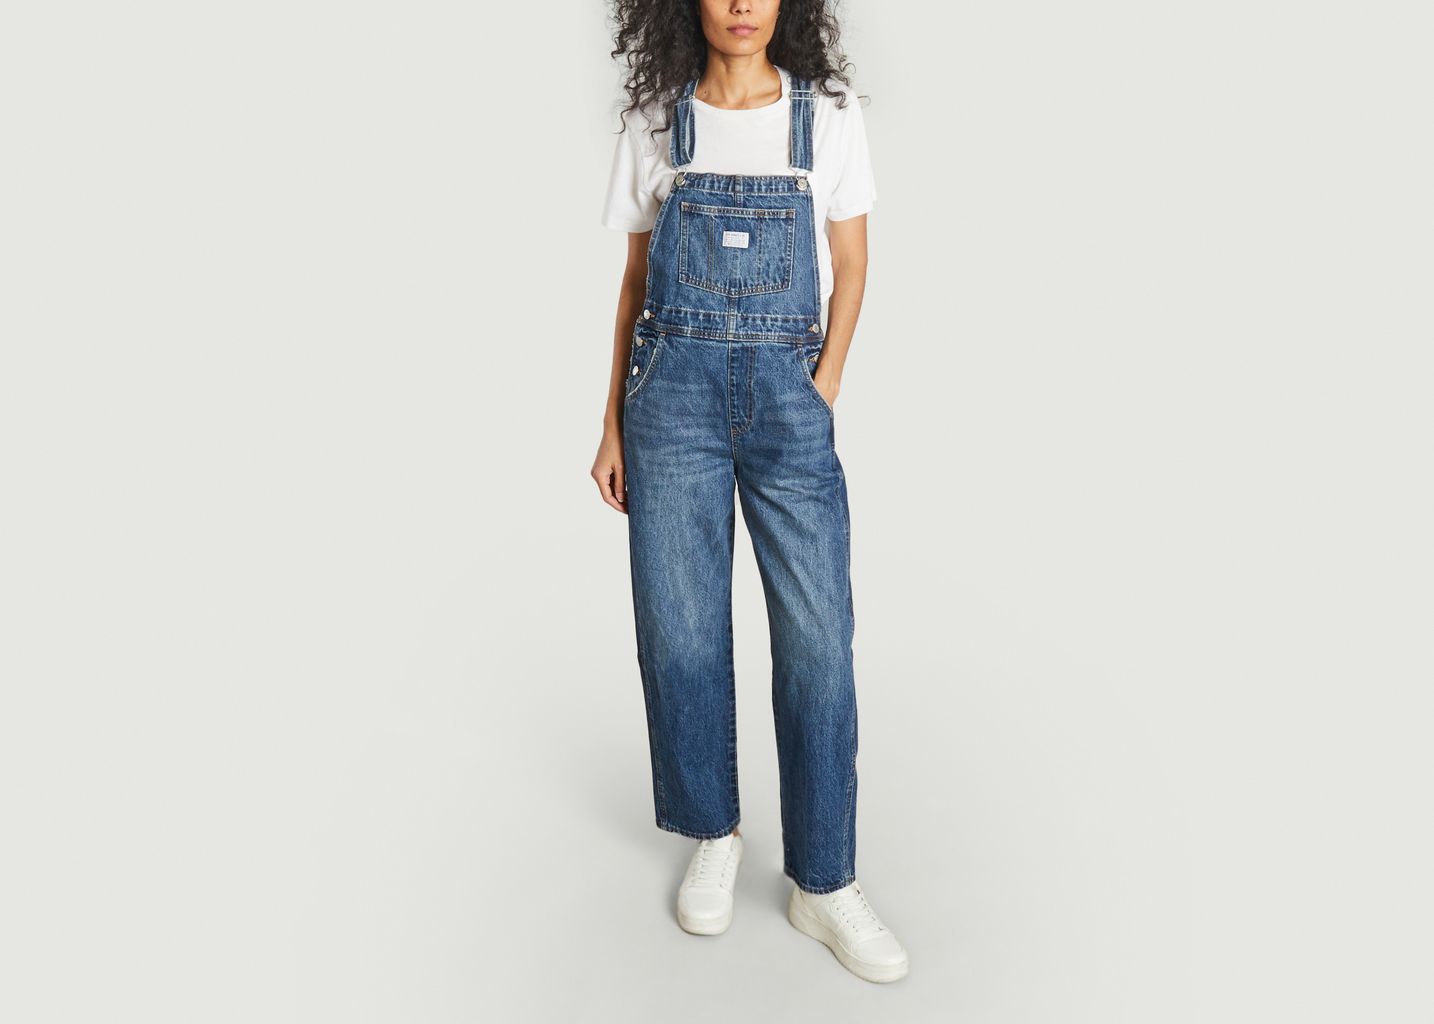 Vintage Overall Latzhose  - Levi's Red Tab